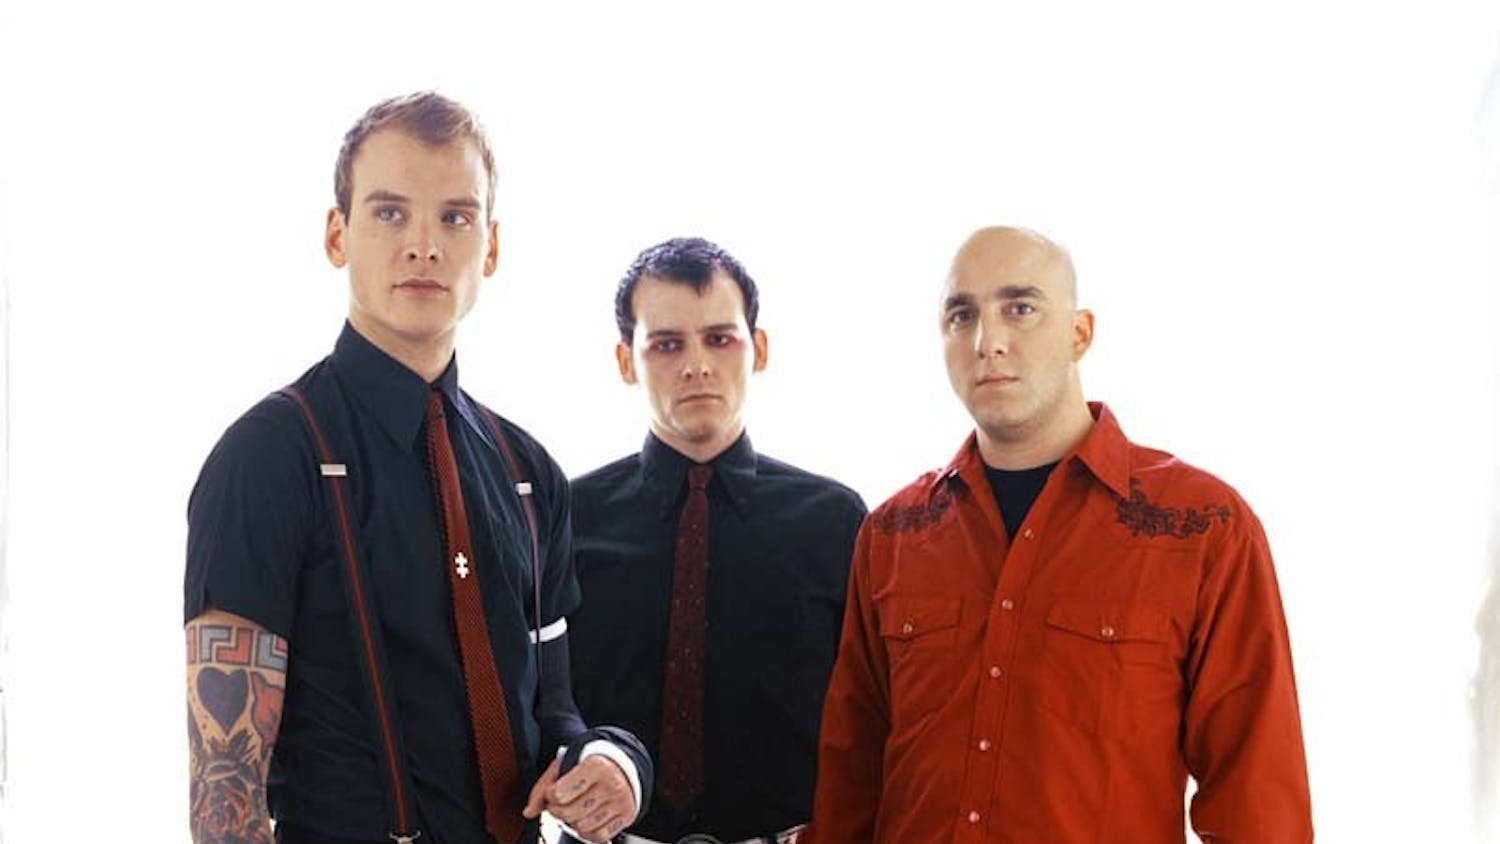 Alkaline Trio both evolves and degrades in Agony & Irony.